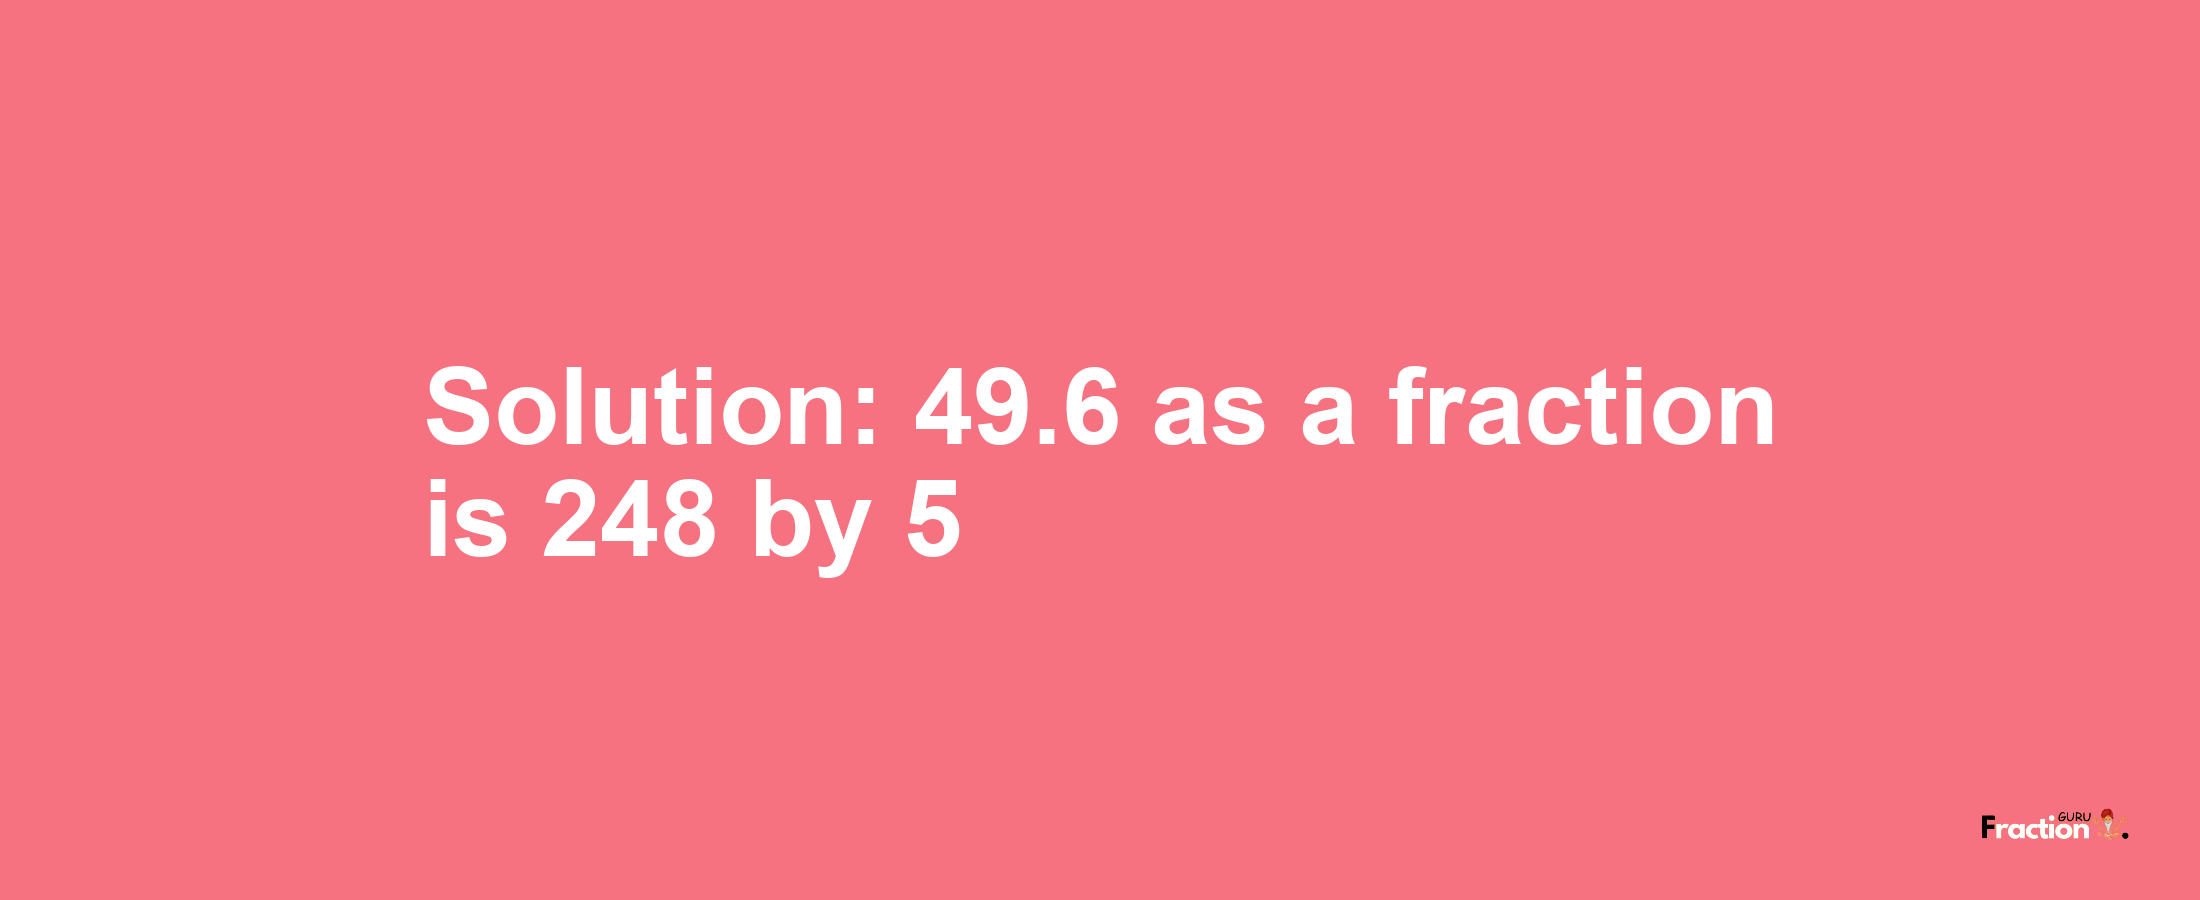 Solution:49.6 as a fraction is 248/5